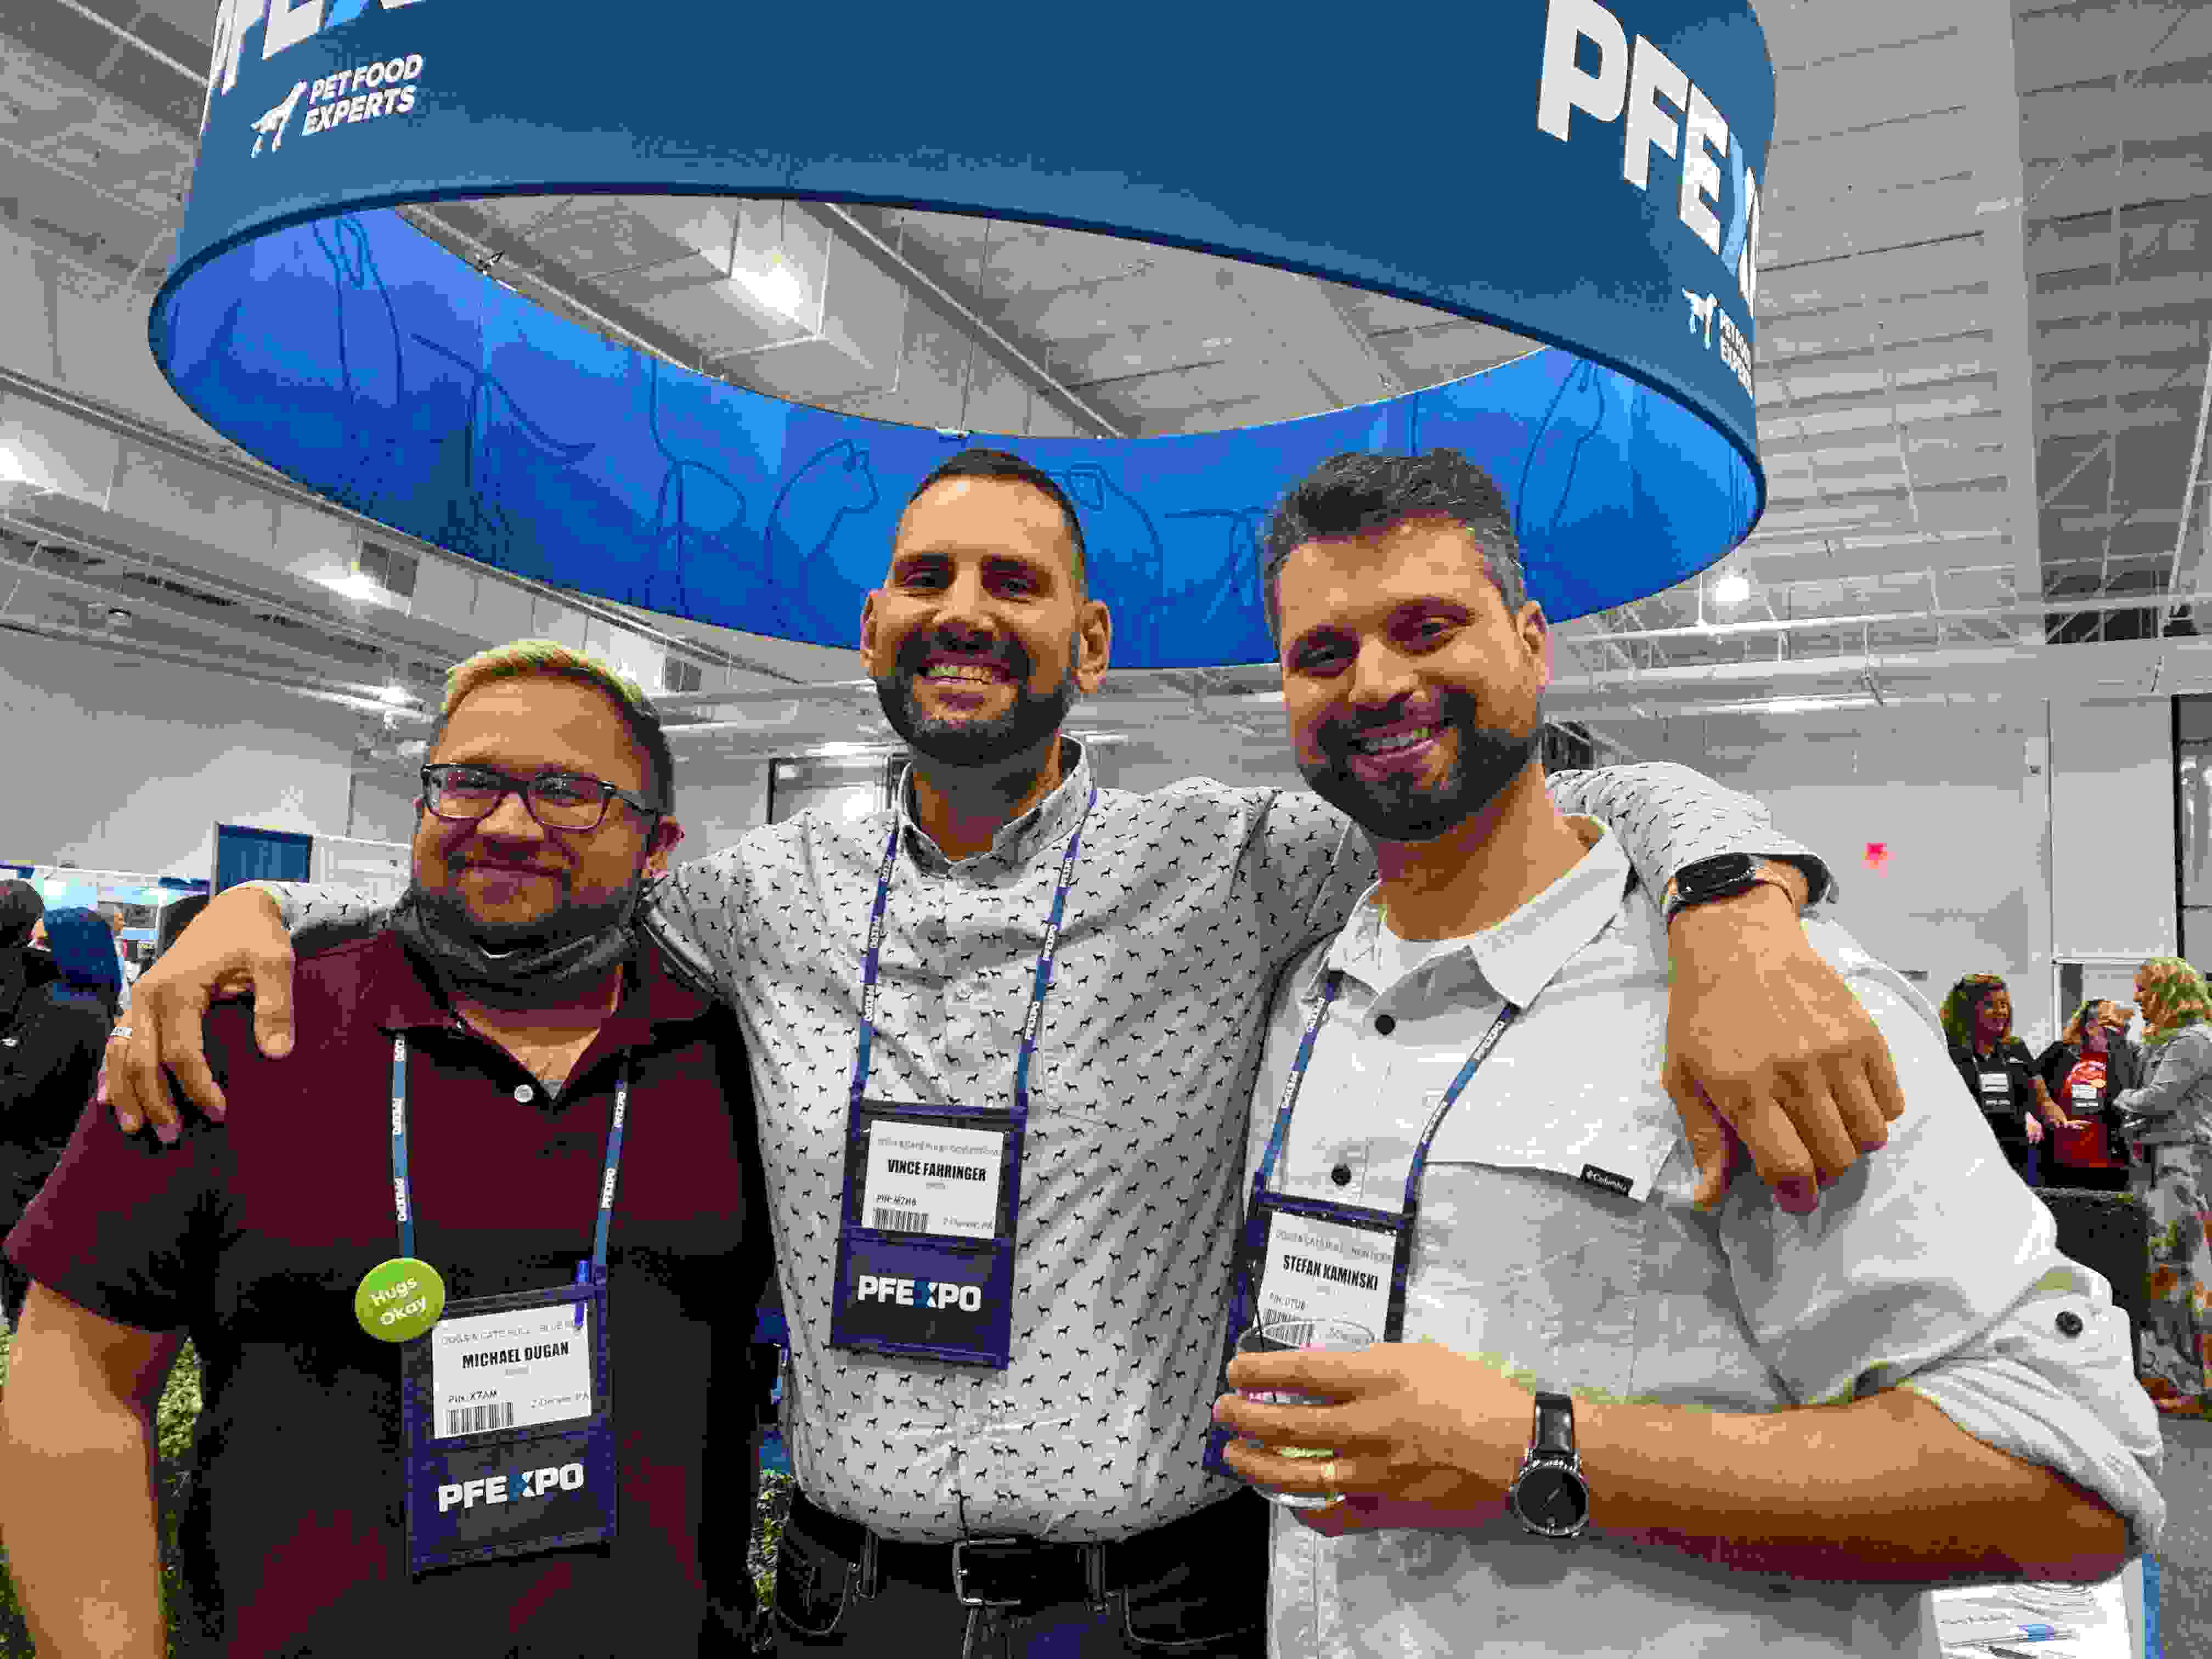 4 Reasons You Should Attend PFEXPO 2022 (Number 3 is Our Favorite)